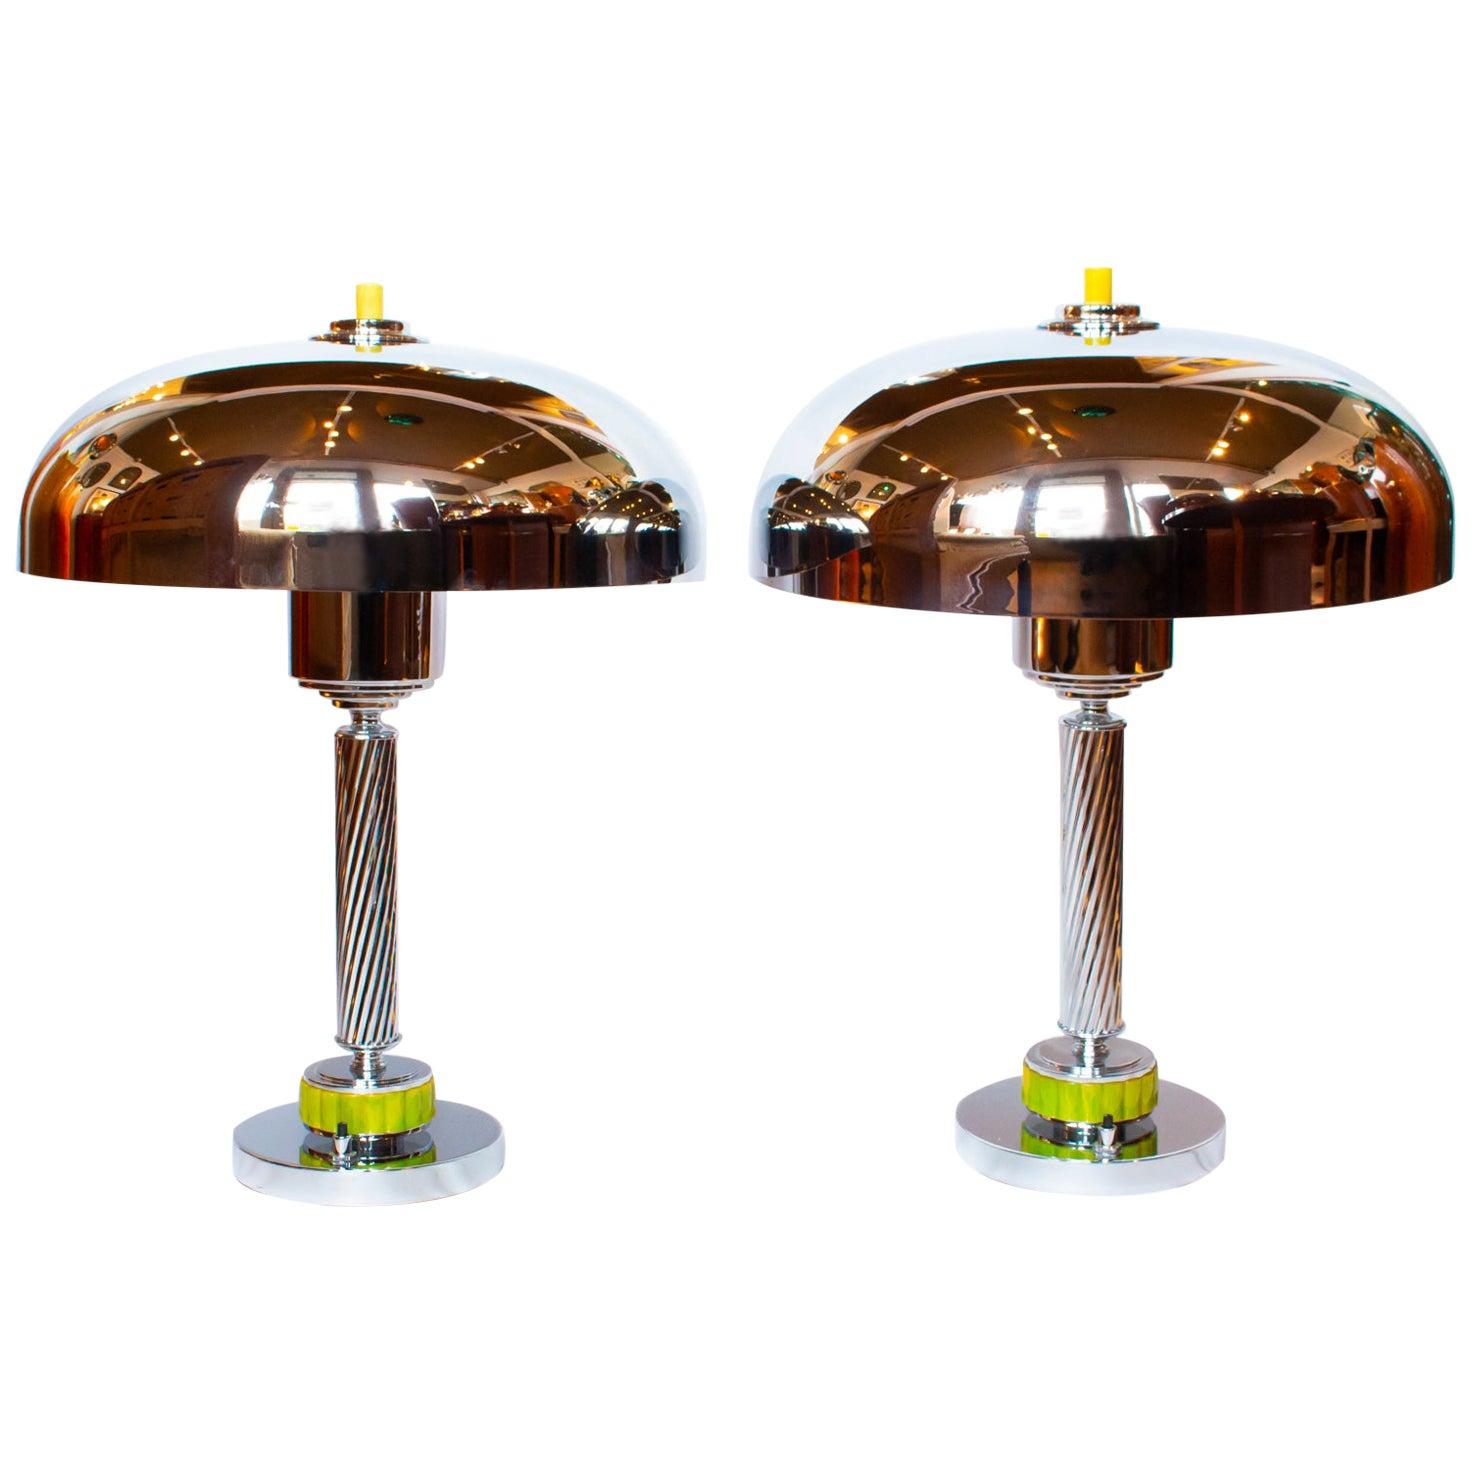 Pair of Art Deco Dome Lamps with Chrome Domed Shades with Chrome Beveled Stem For Sale